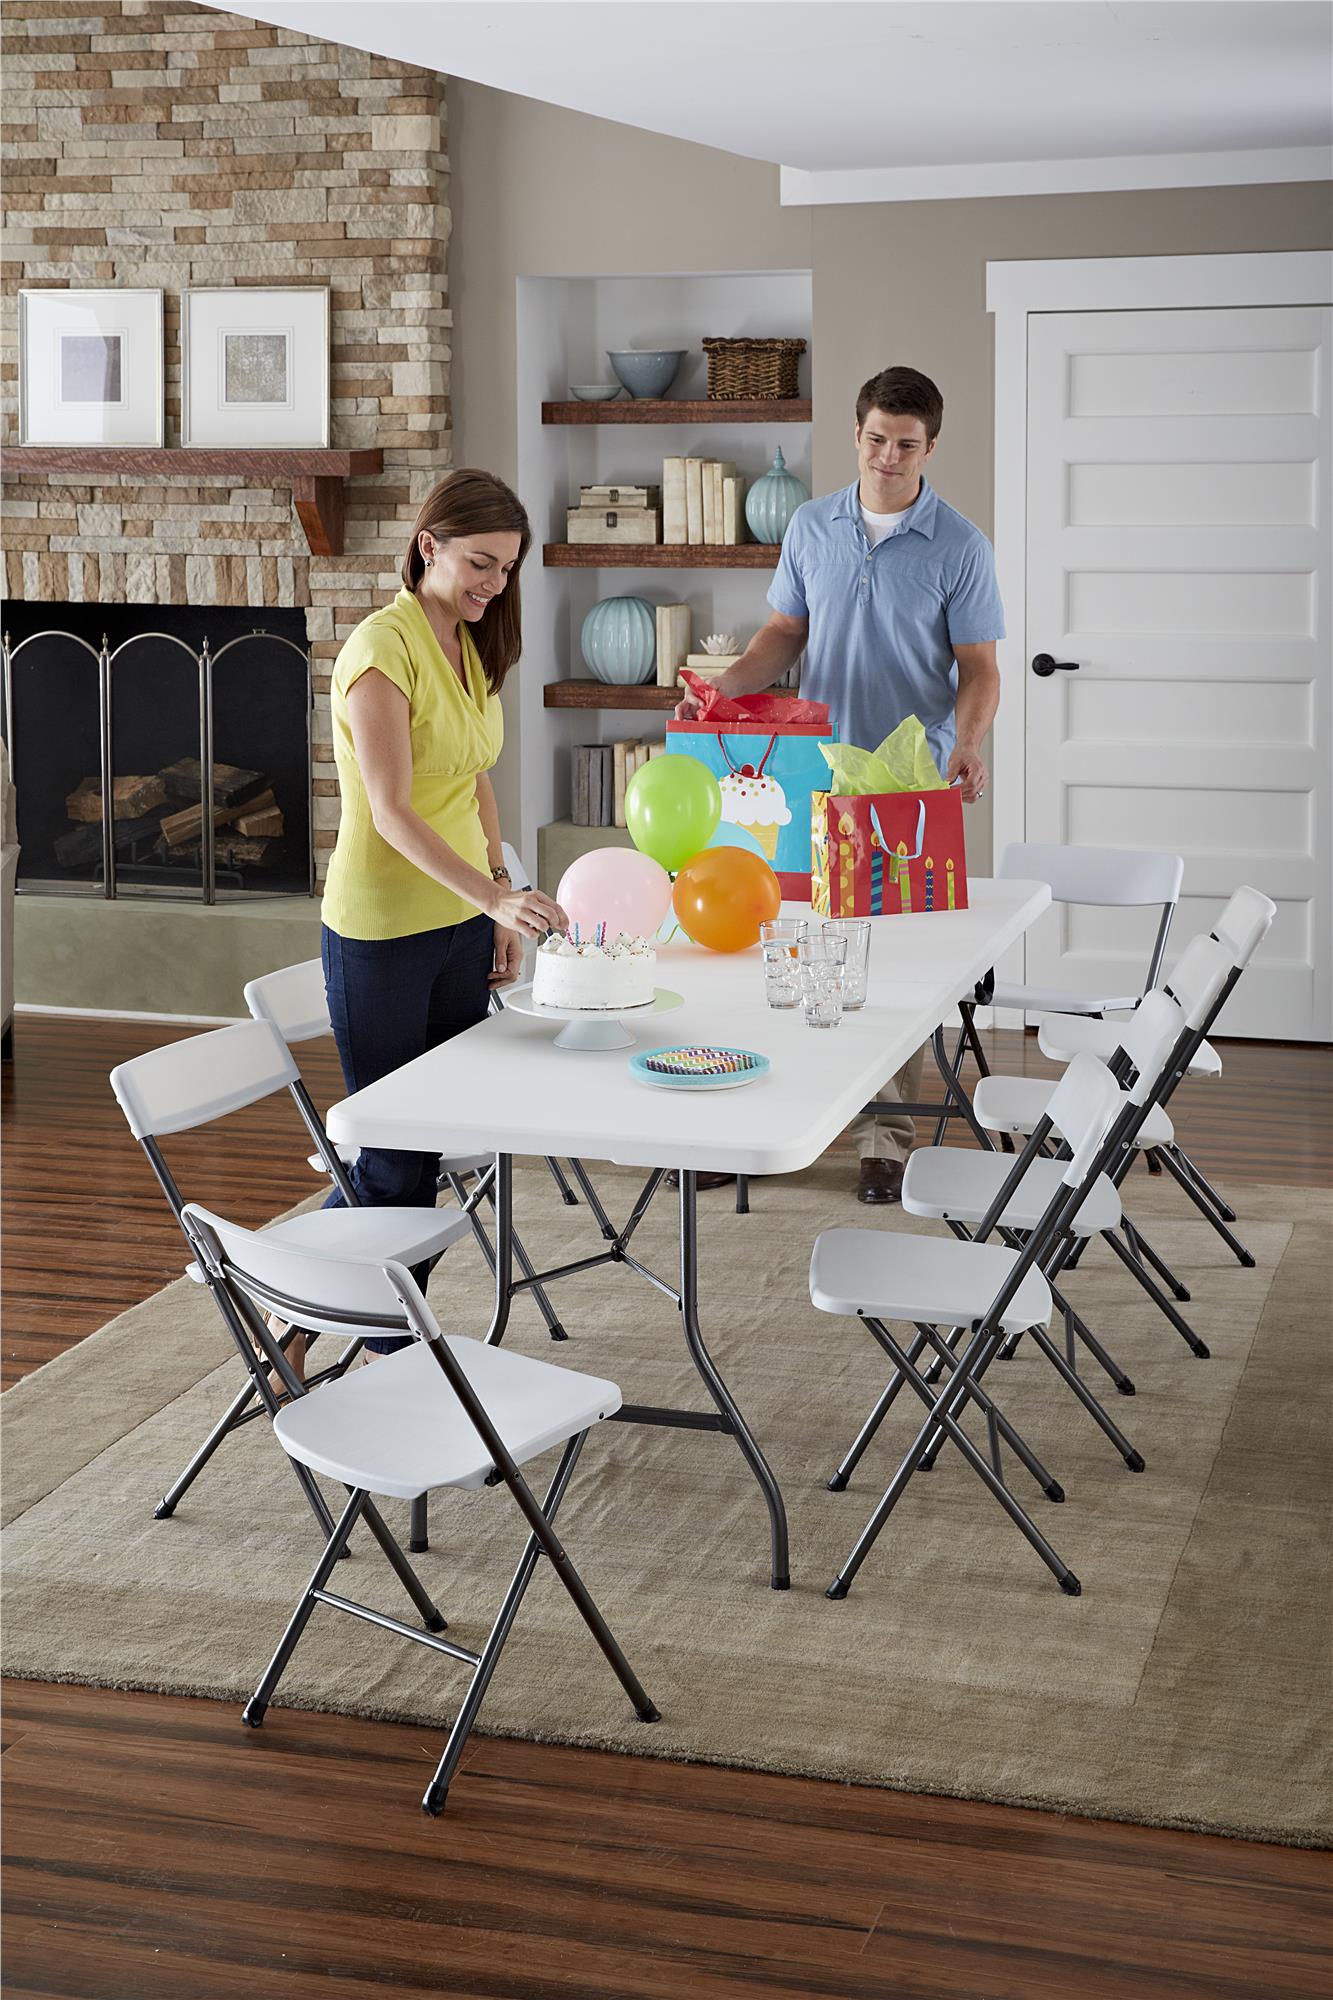 Cosco 8 Foot Centerfold Folding Table, White - image 5 of 14